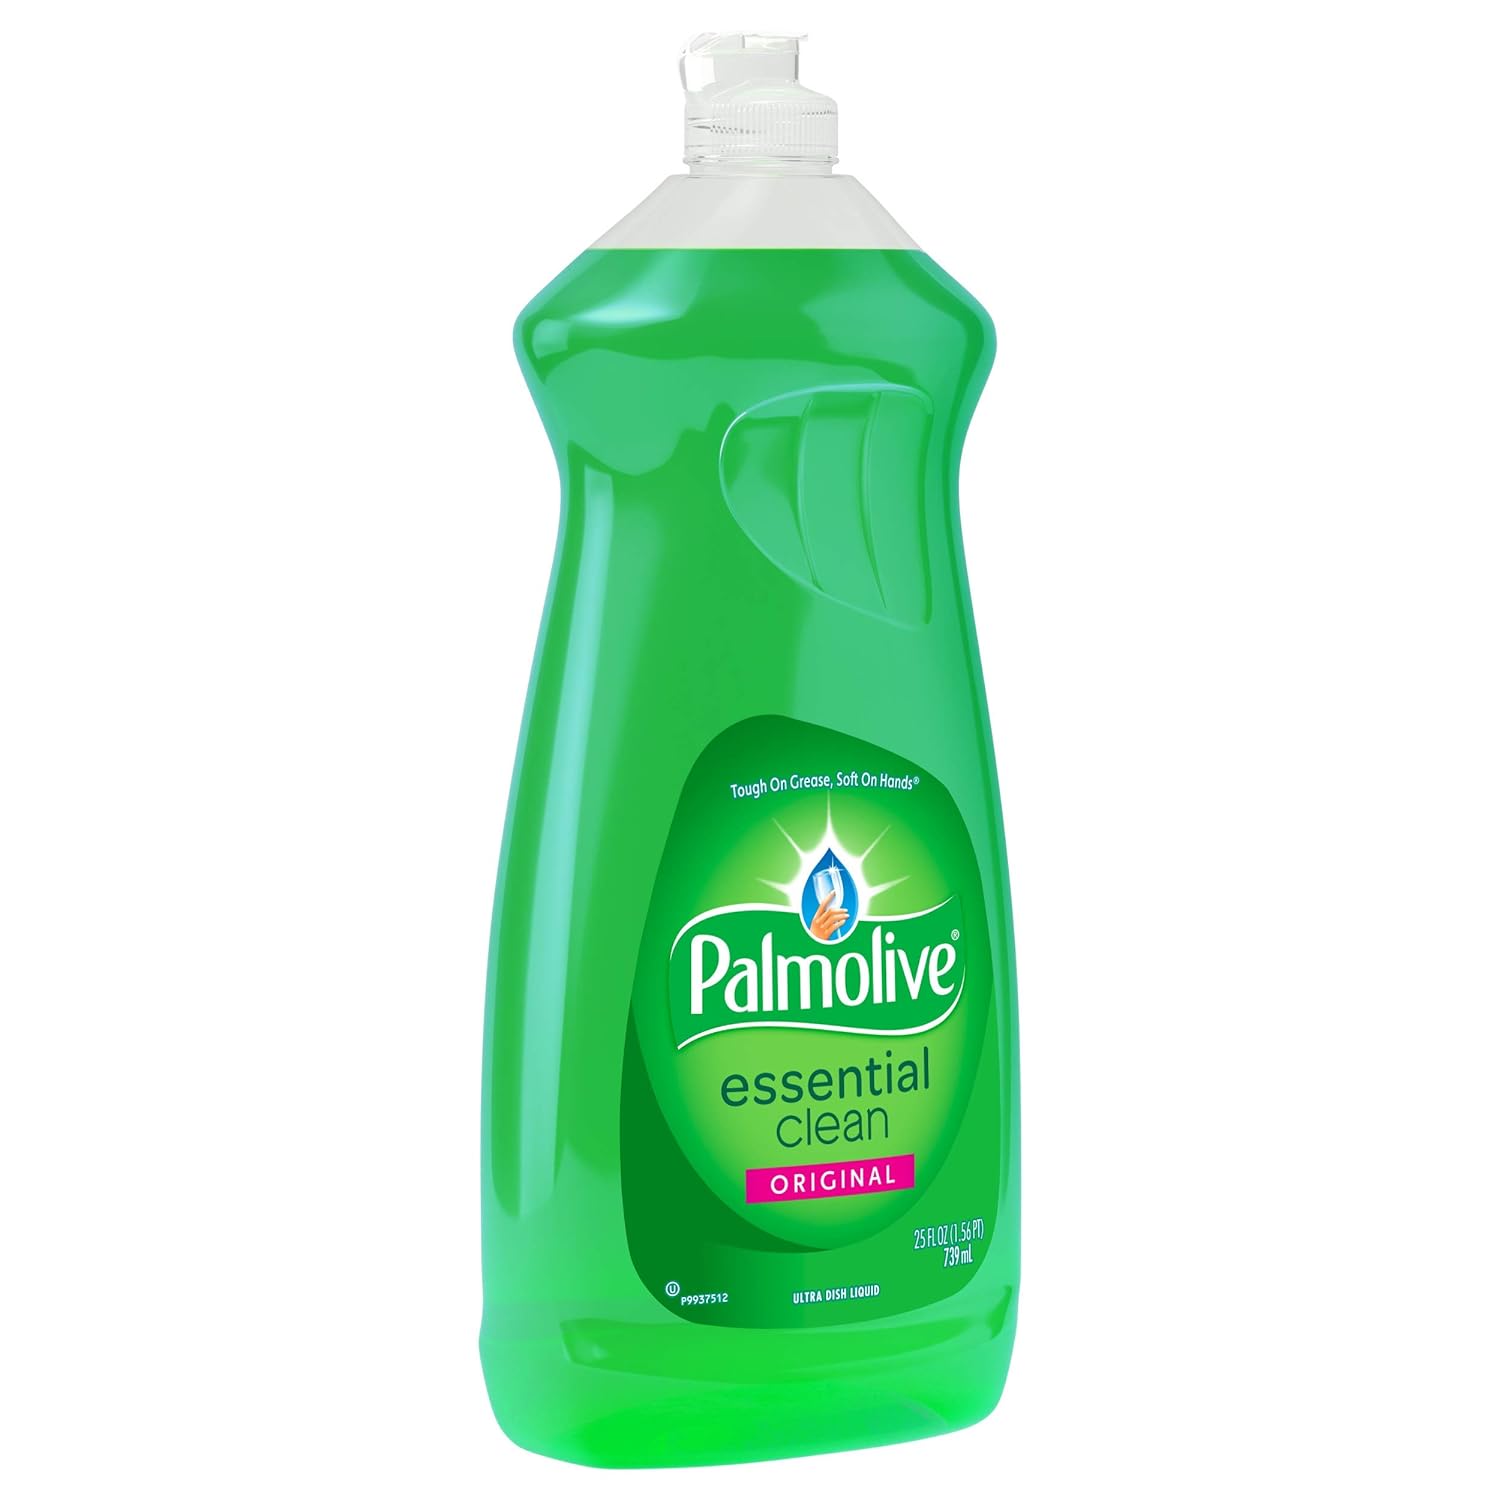 Palmolive Liquid Dish Soap, Original - 25 Fluid Ounce (Pack of 9) : Health & Household